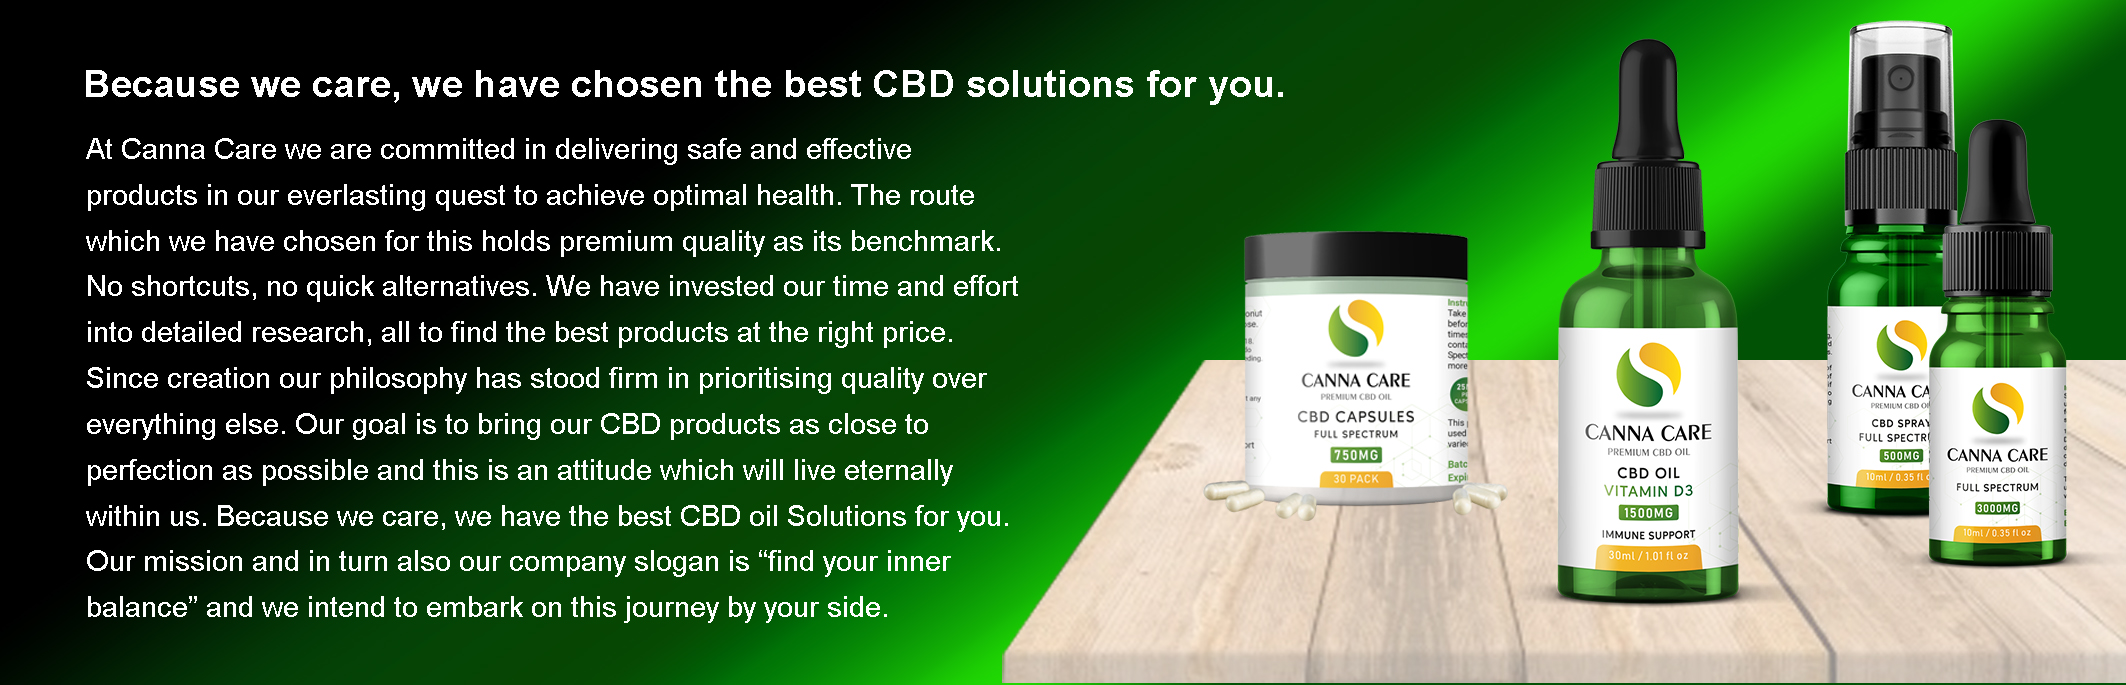 https://cannacare.gi/wp-content/uploads/2021/10/Banner_About_Us_11.jpg